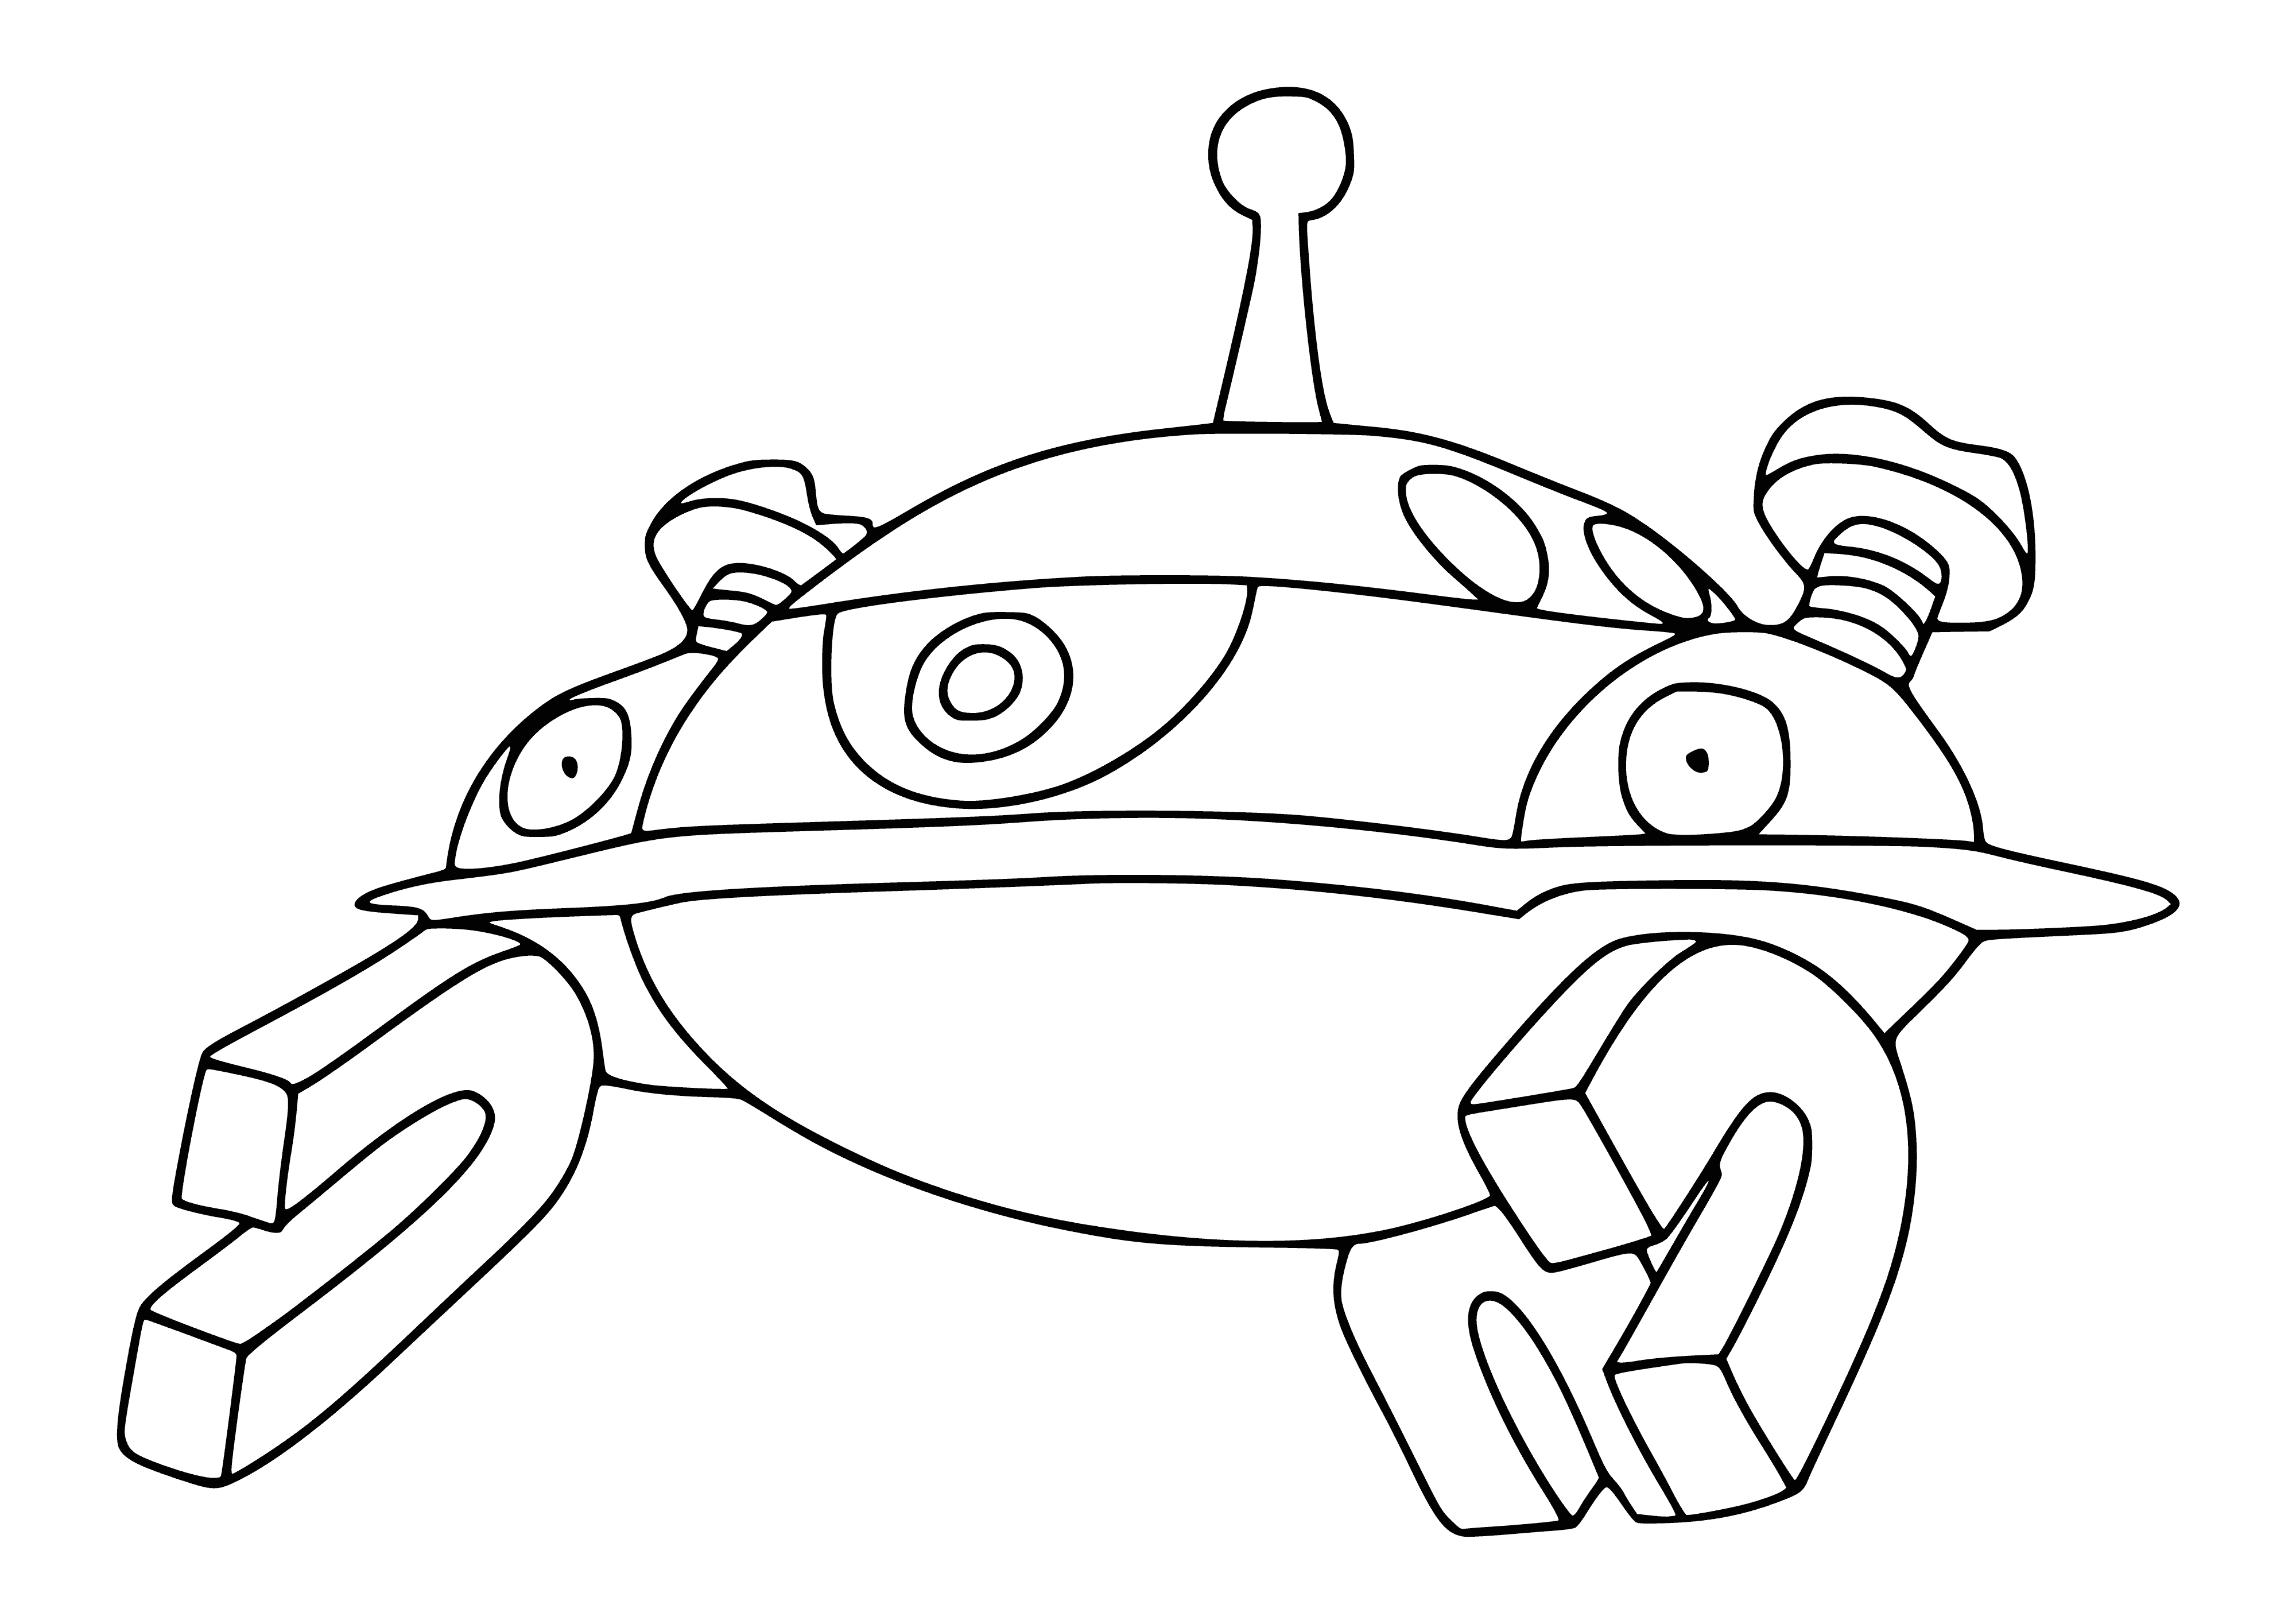 coloring page: Magnezone evolves from Magnemite, is metal-looking & has round head, beak, triangular ears & 3 red spots.